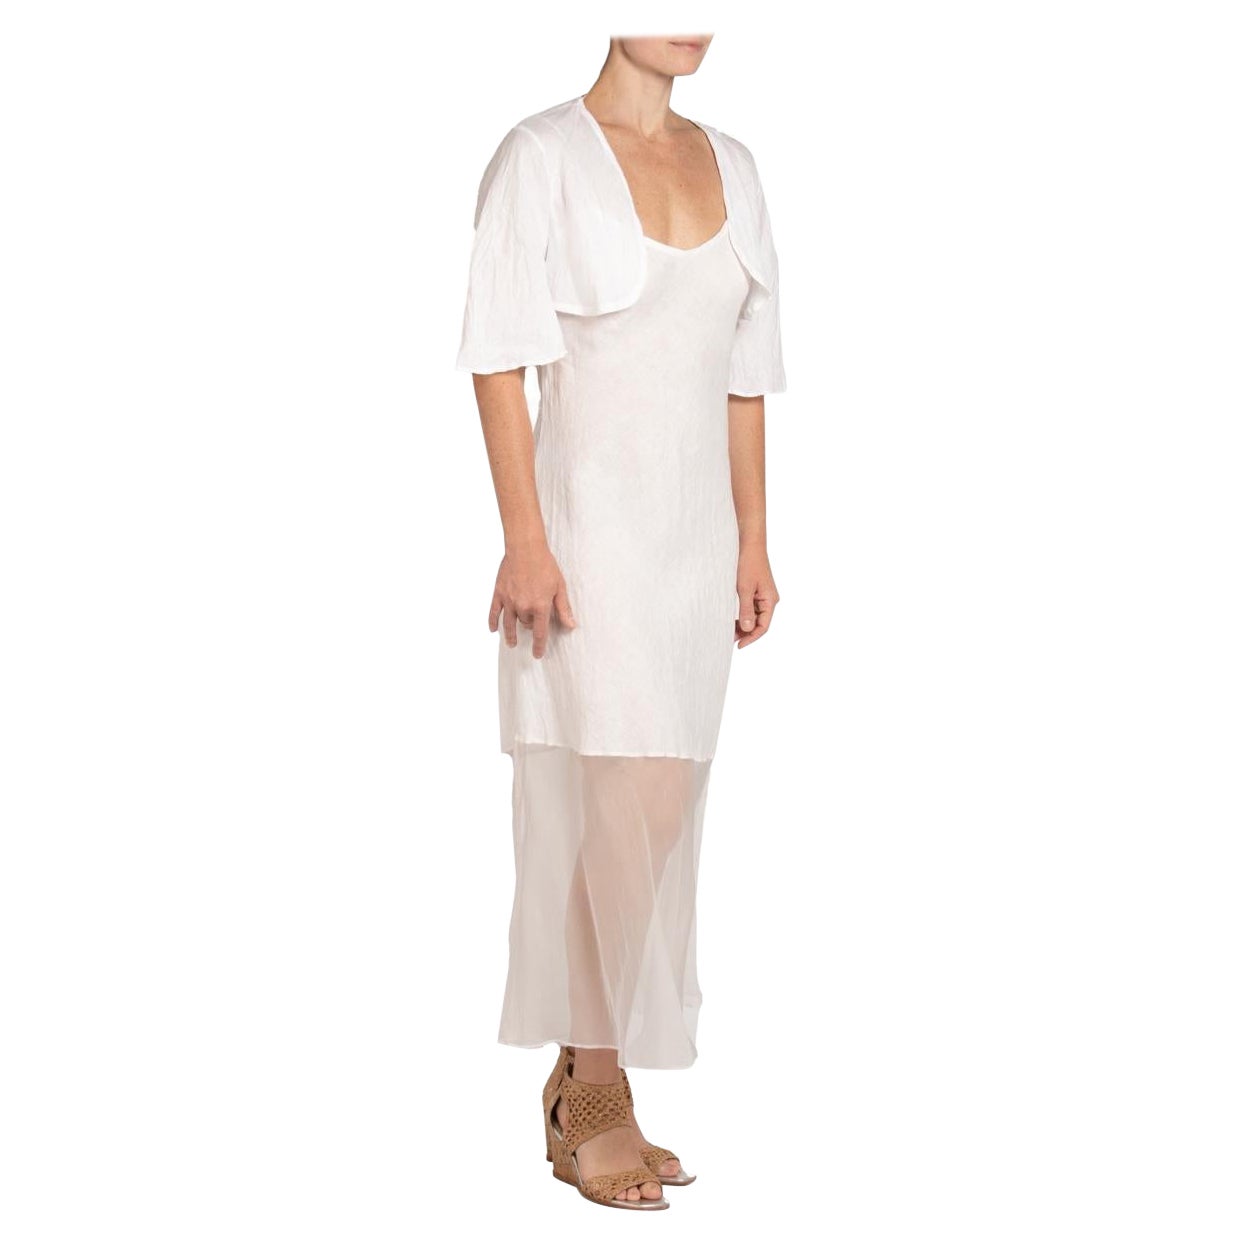 MORPHEW COLLECTION White Linen Bias Cut Dress With Jacket For Sale